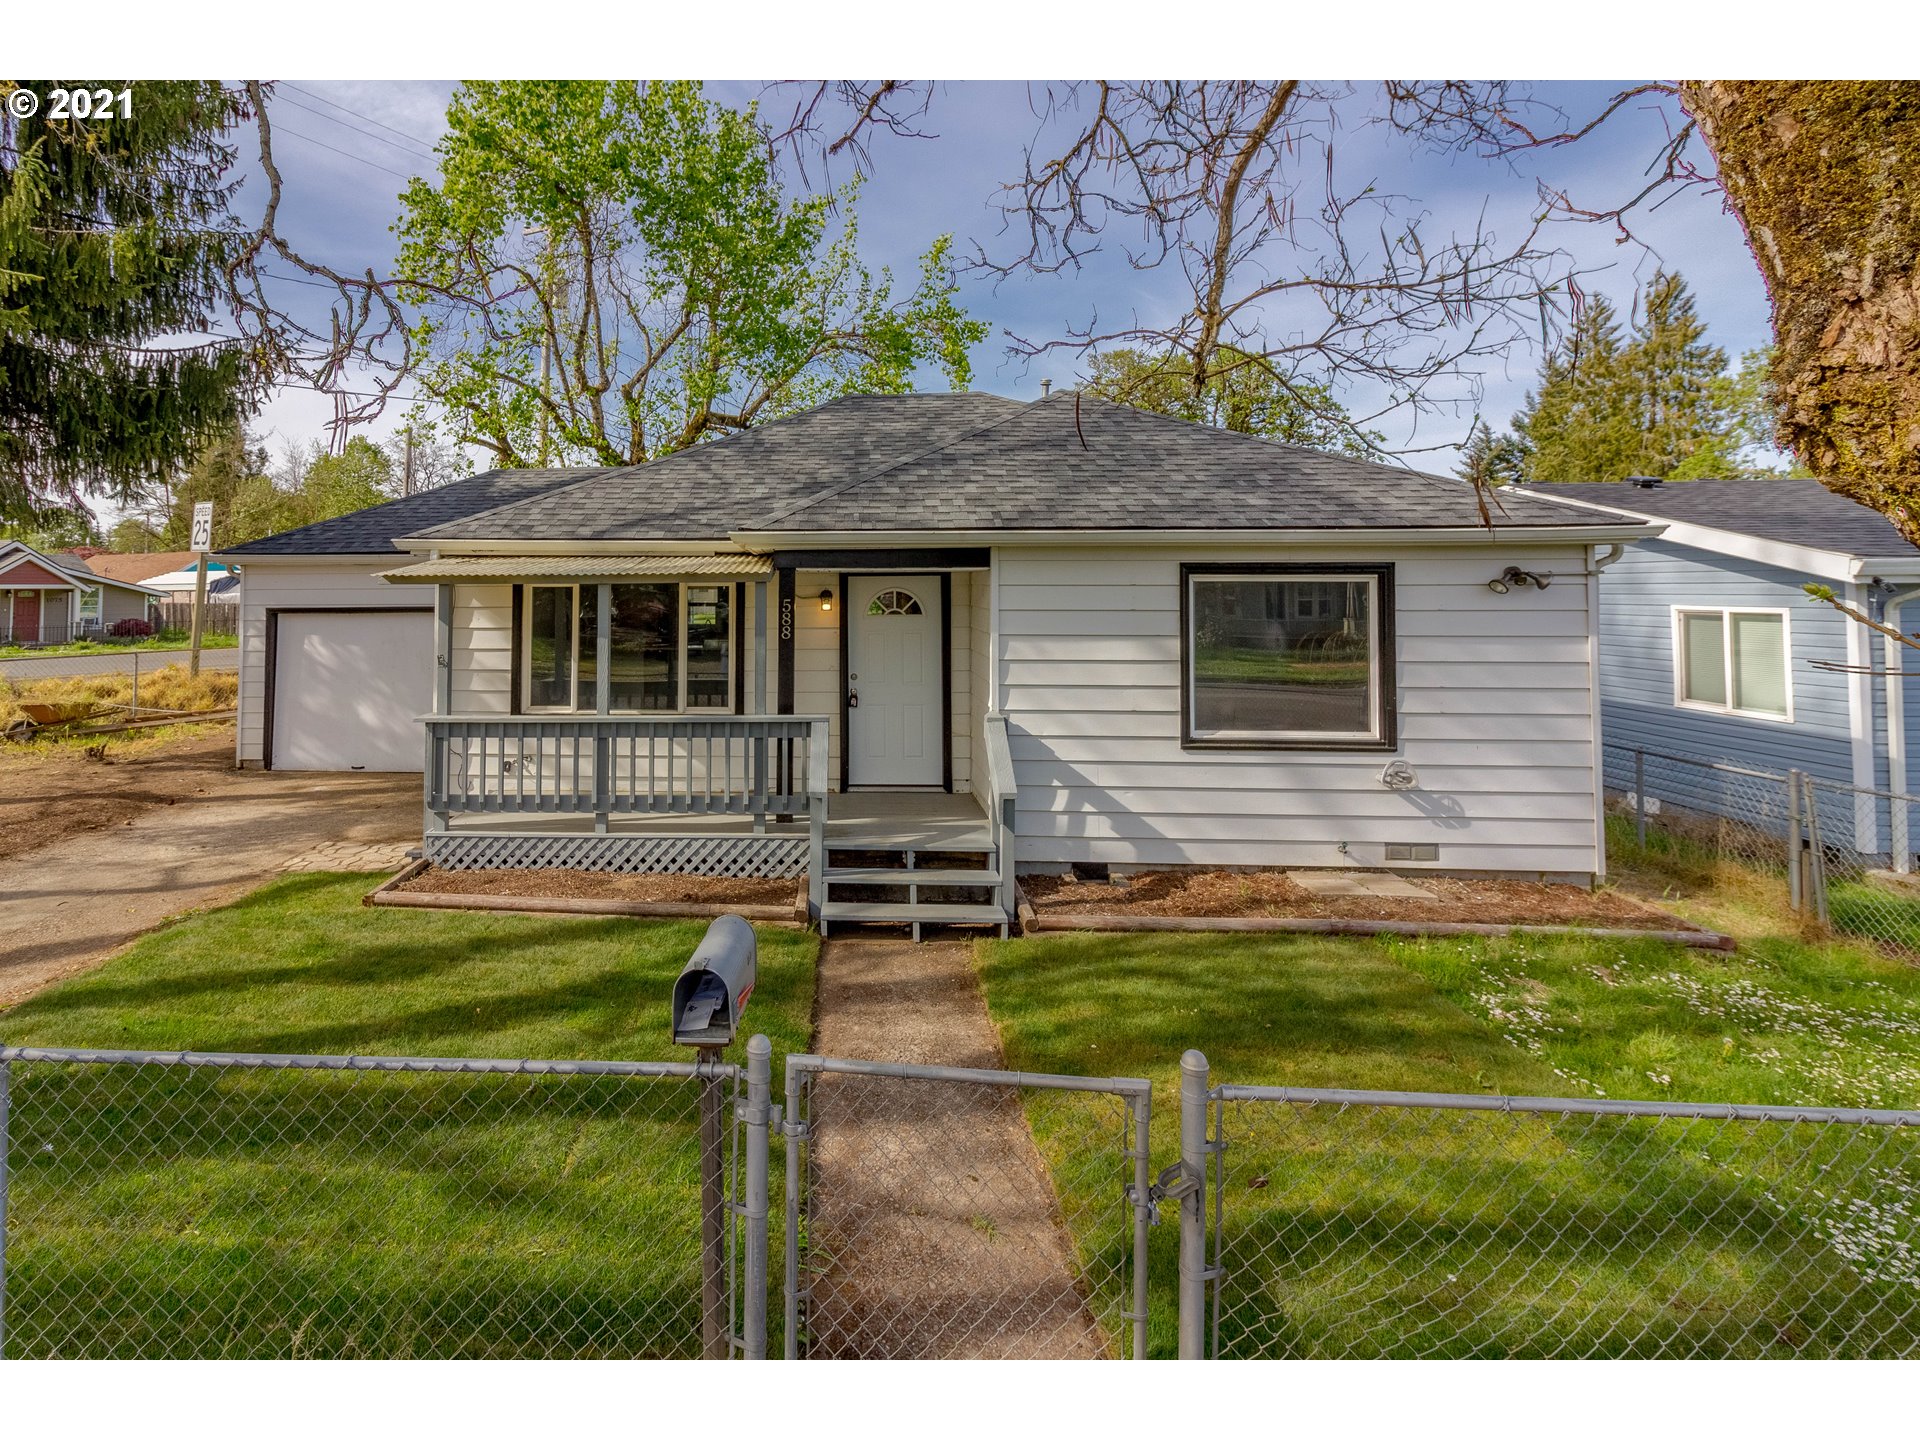 588 CLAY ST (1 of 31)